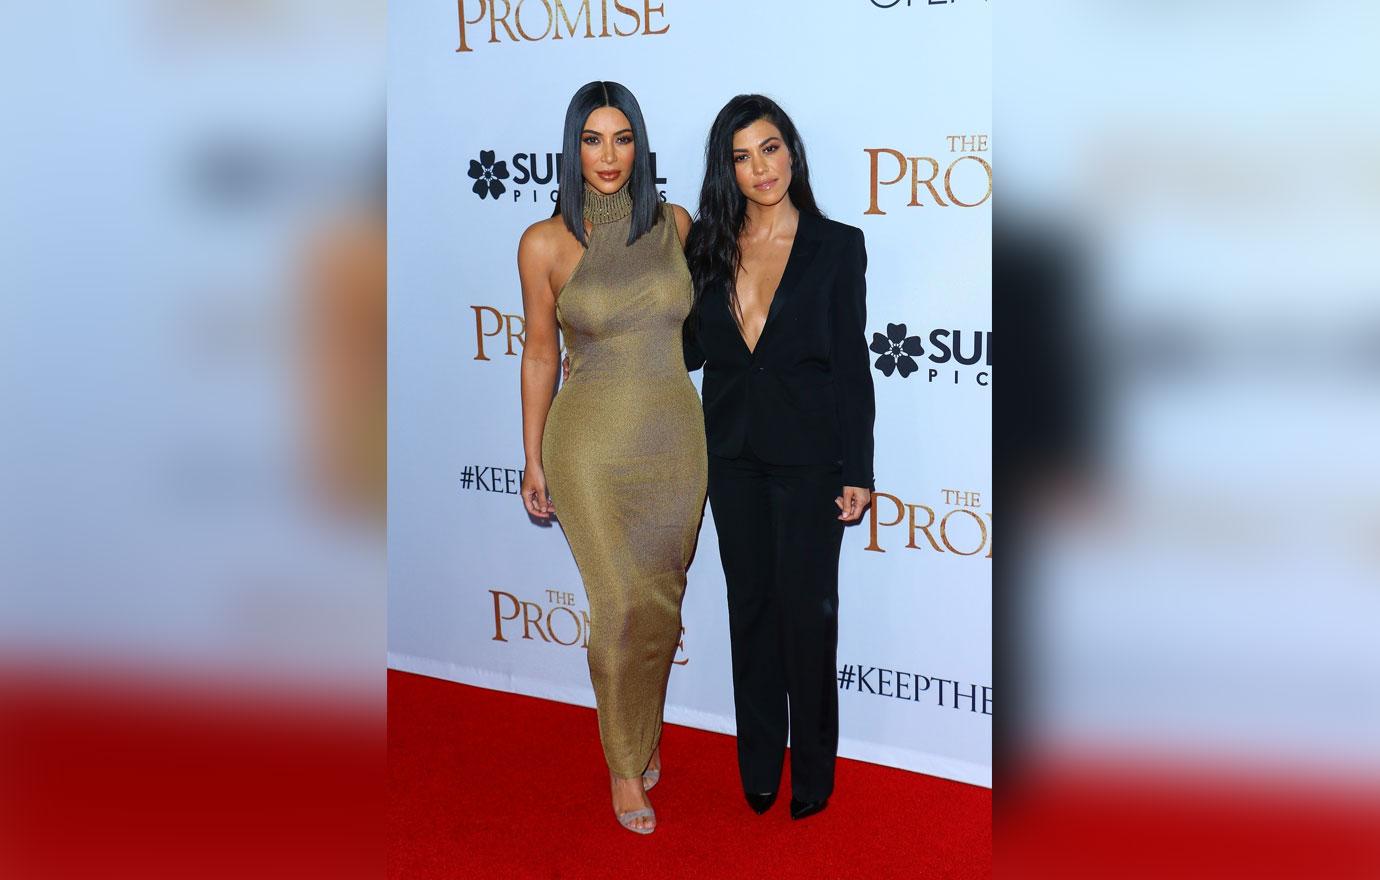 PICS Cher And The Kardashians Unite At The Premiere Of The Promise